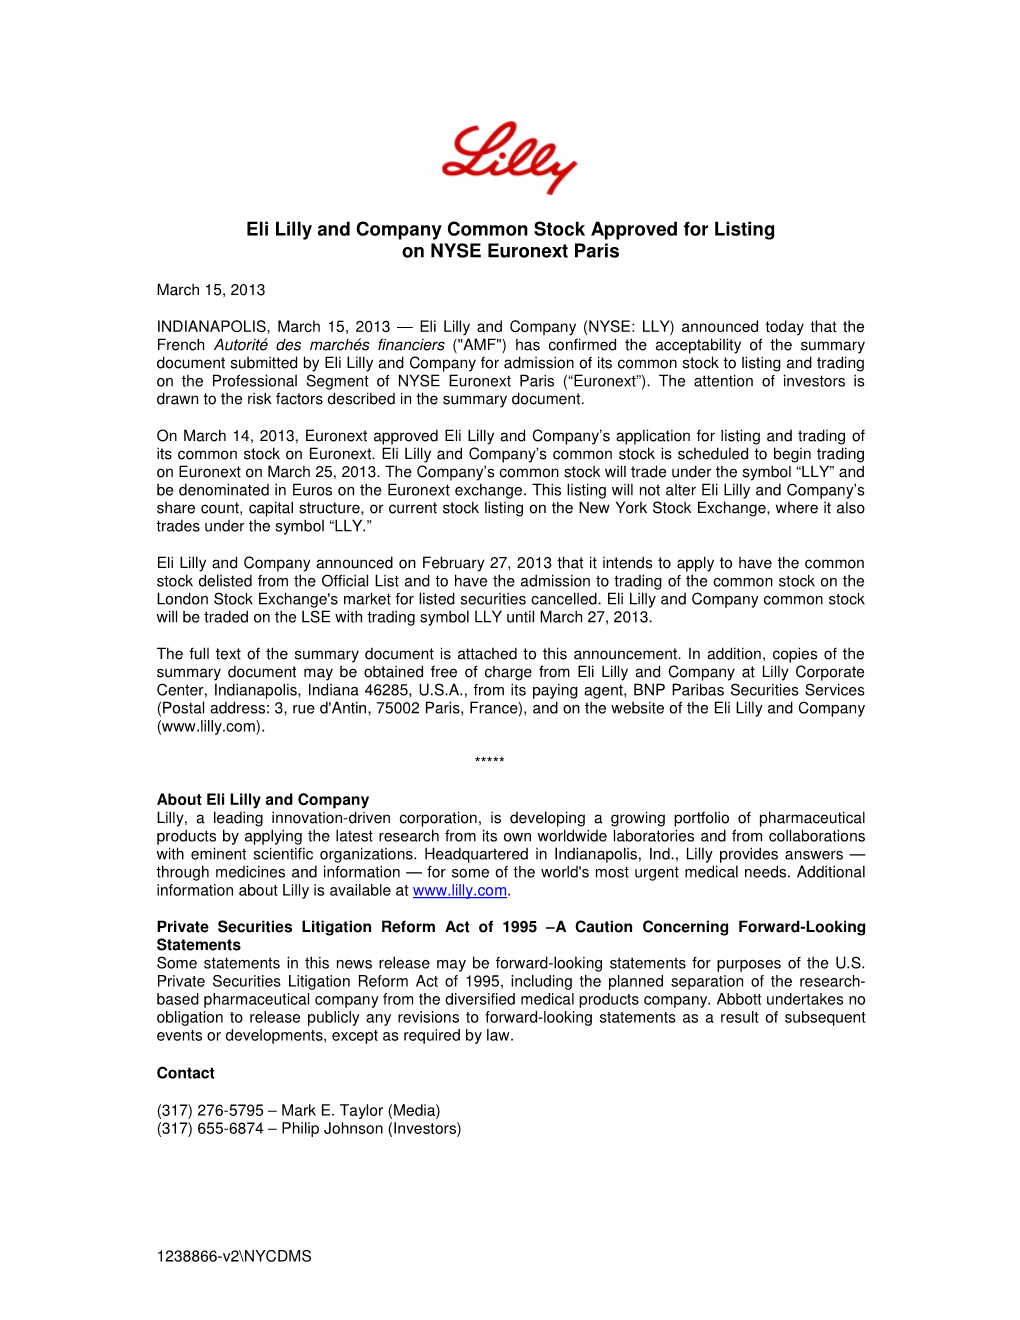 Eli Lilly and Company Common Stock Approved for Listing on NYSE Euronext Paris